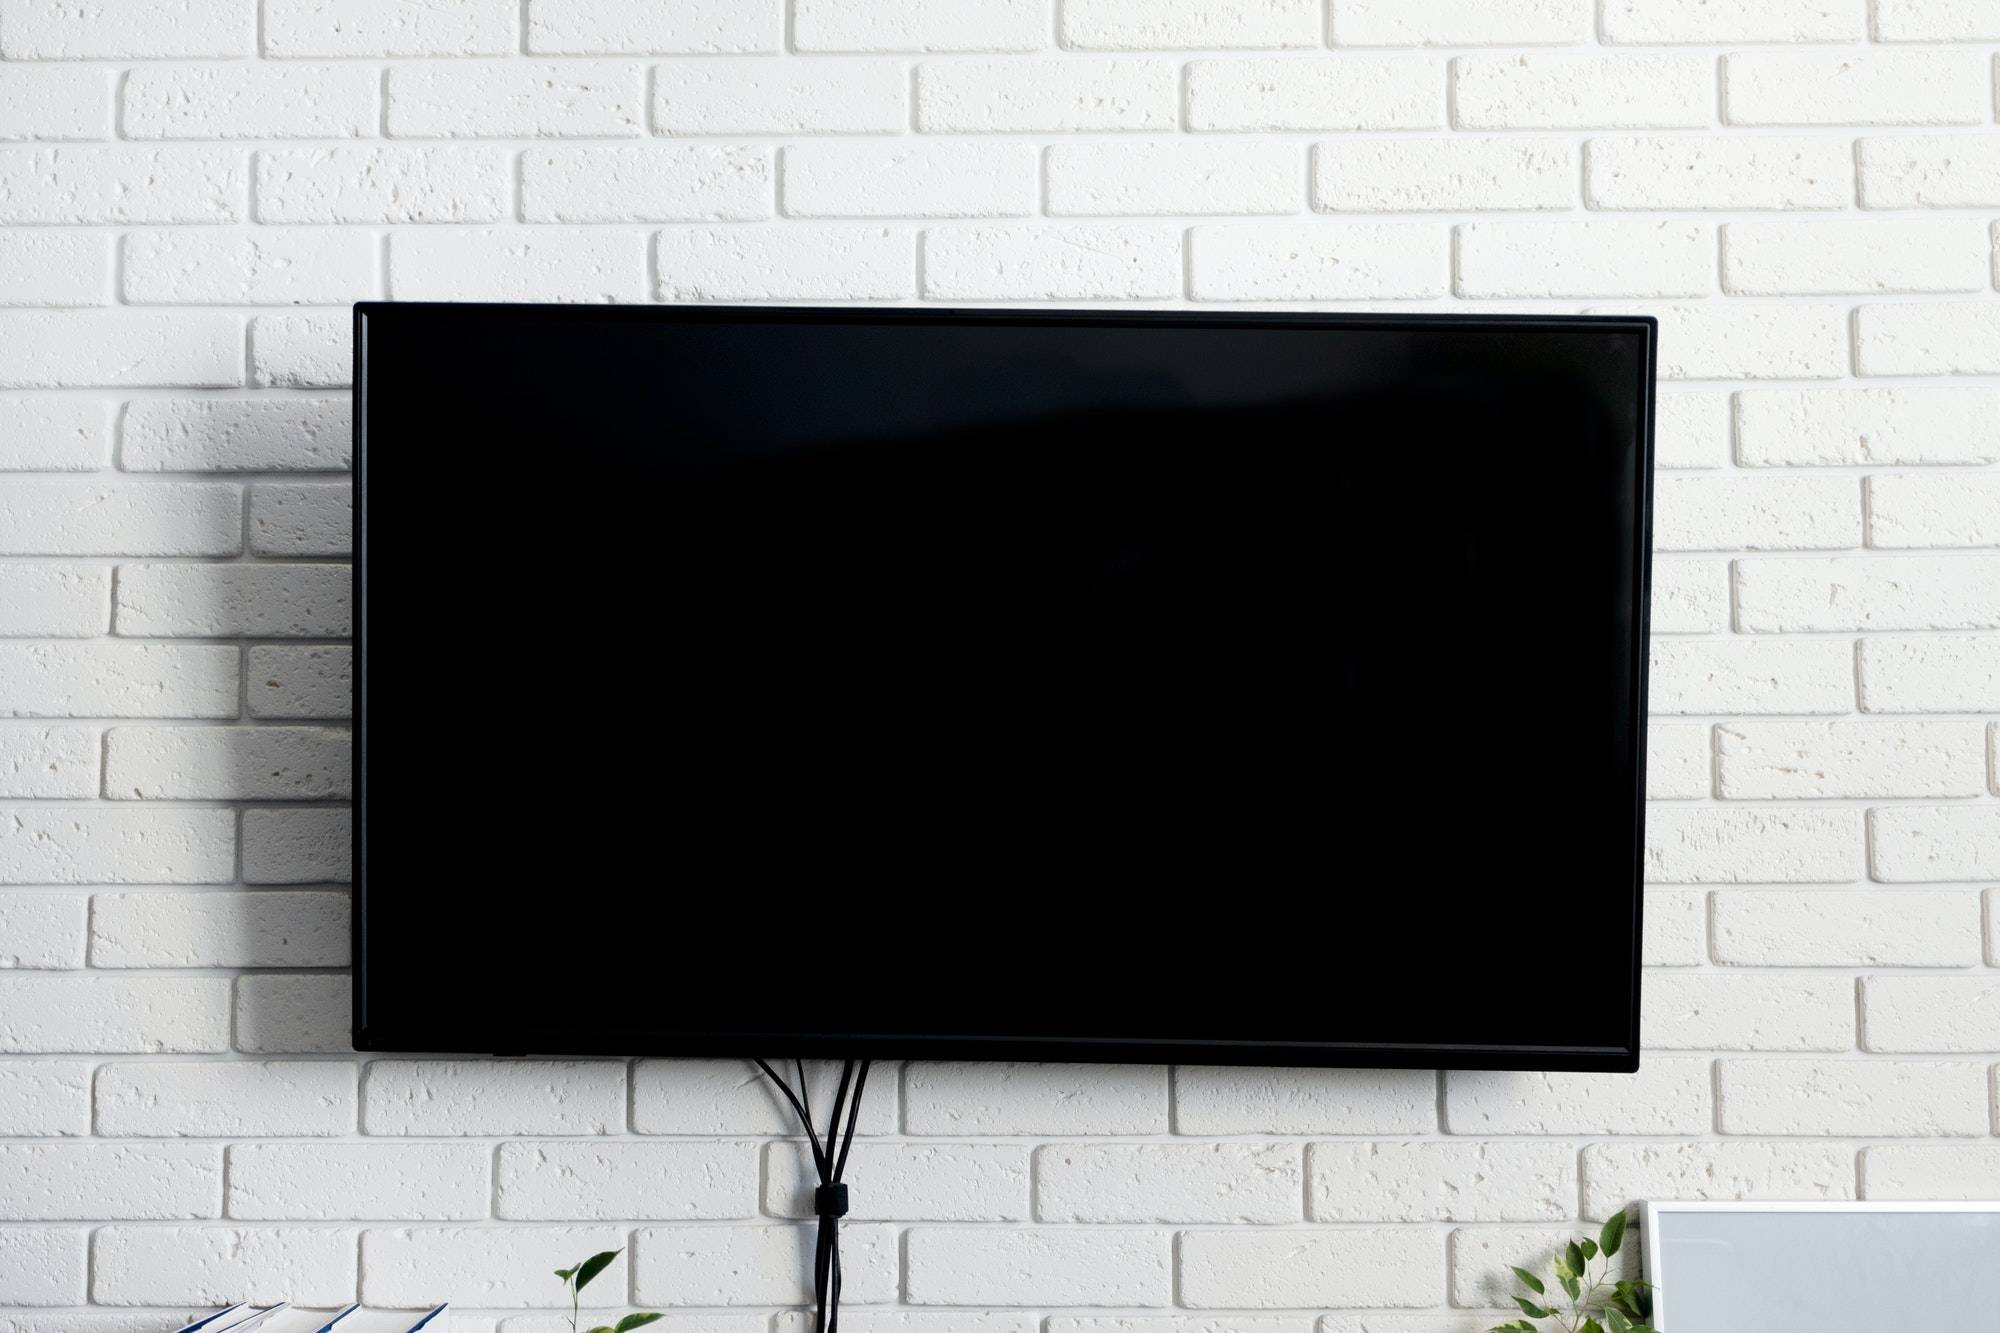 Led tv black color on brick white wall, indoors. Living room. Concept rest at home